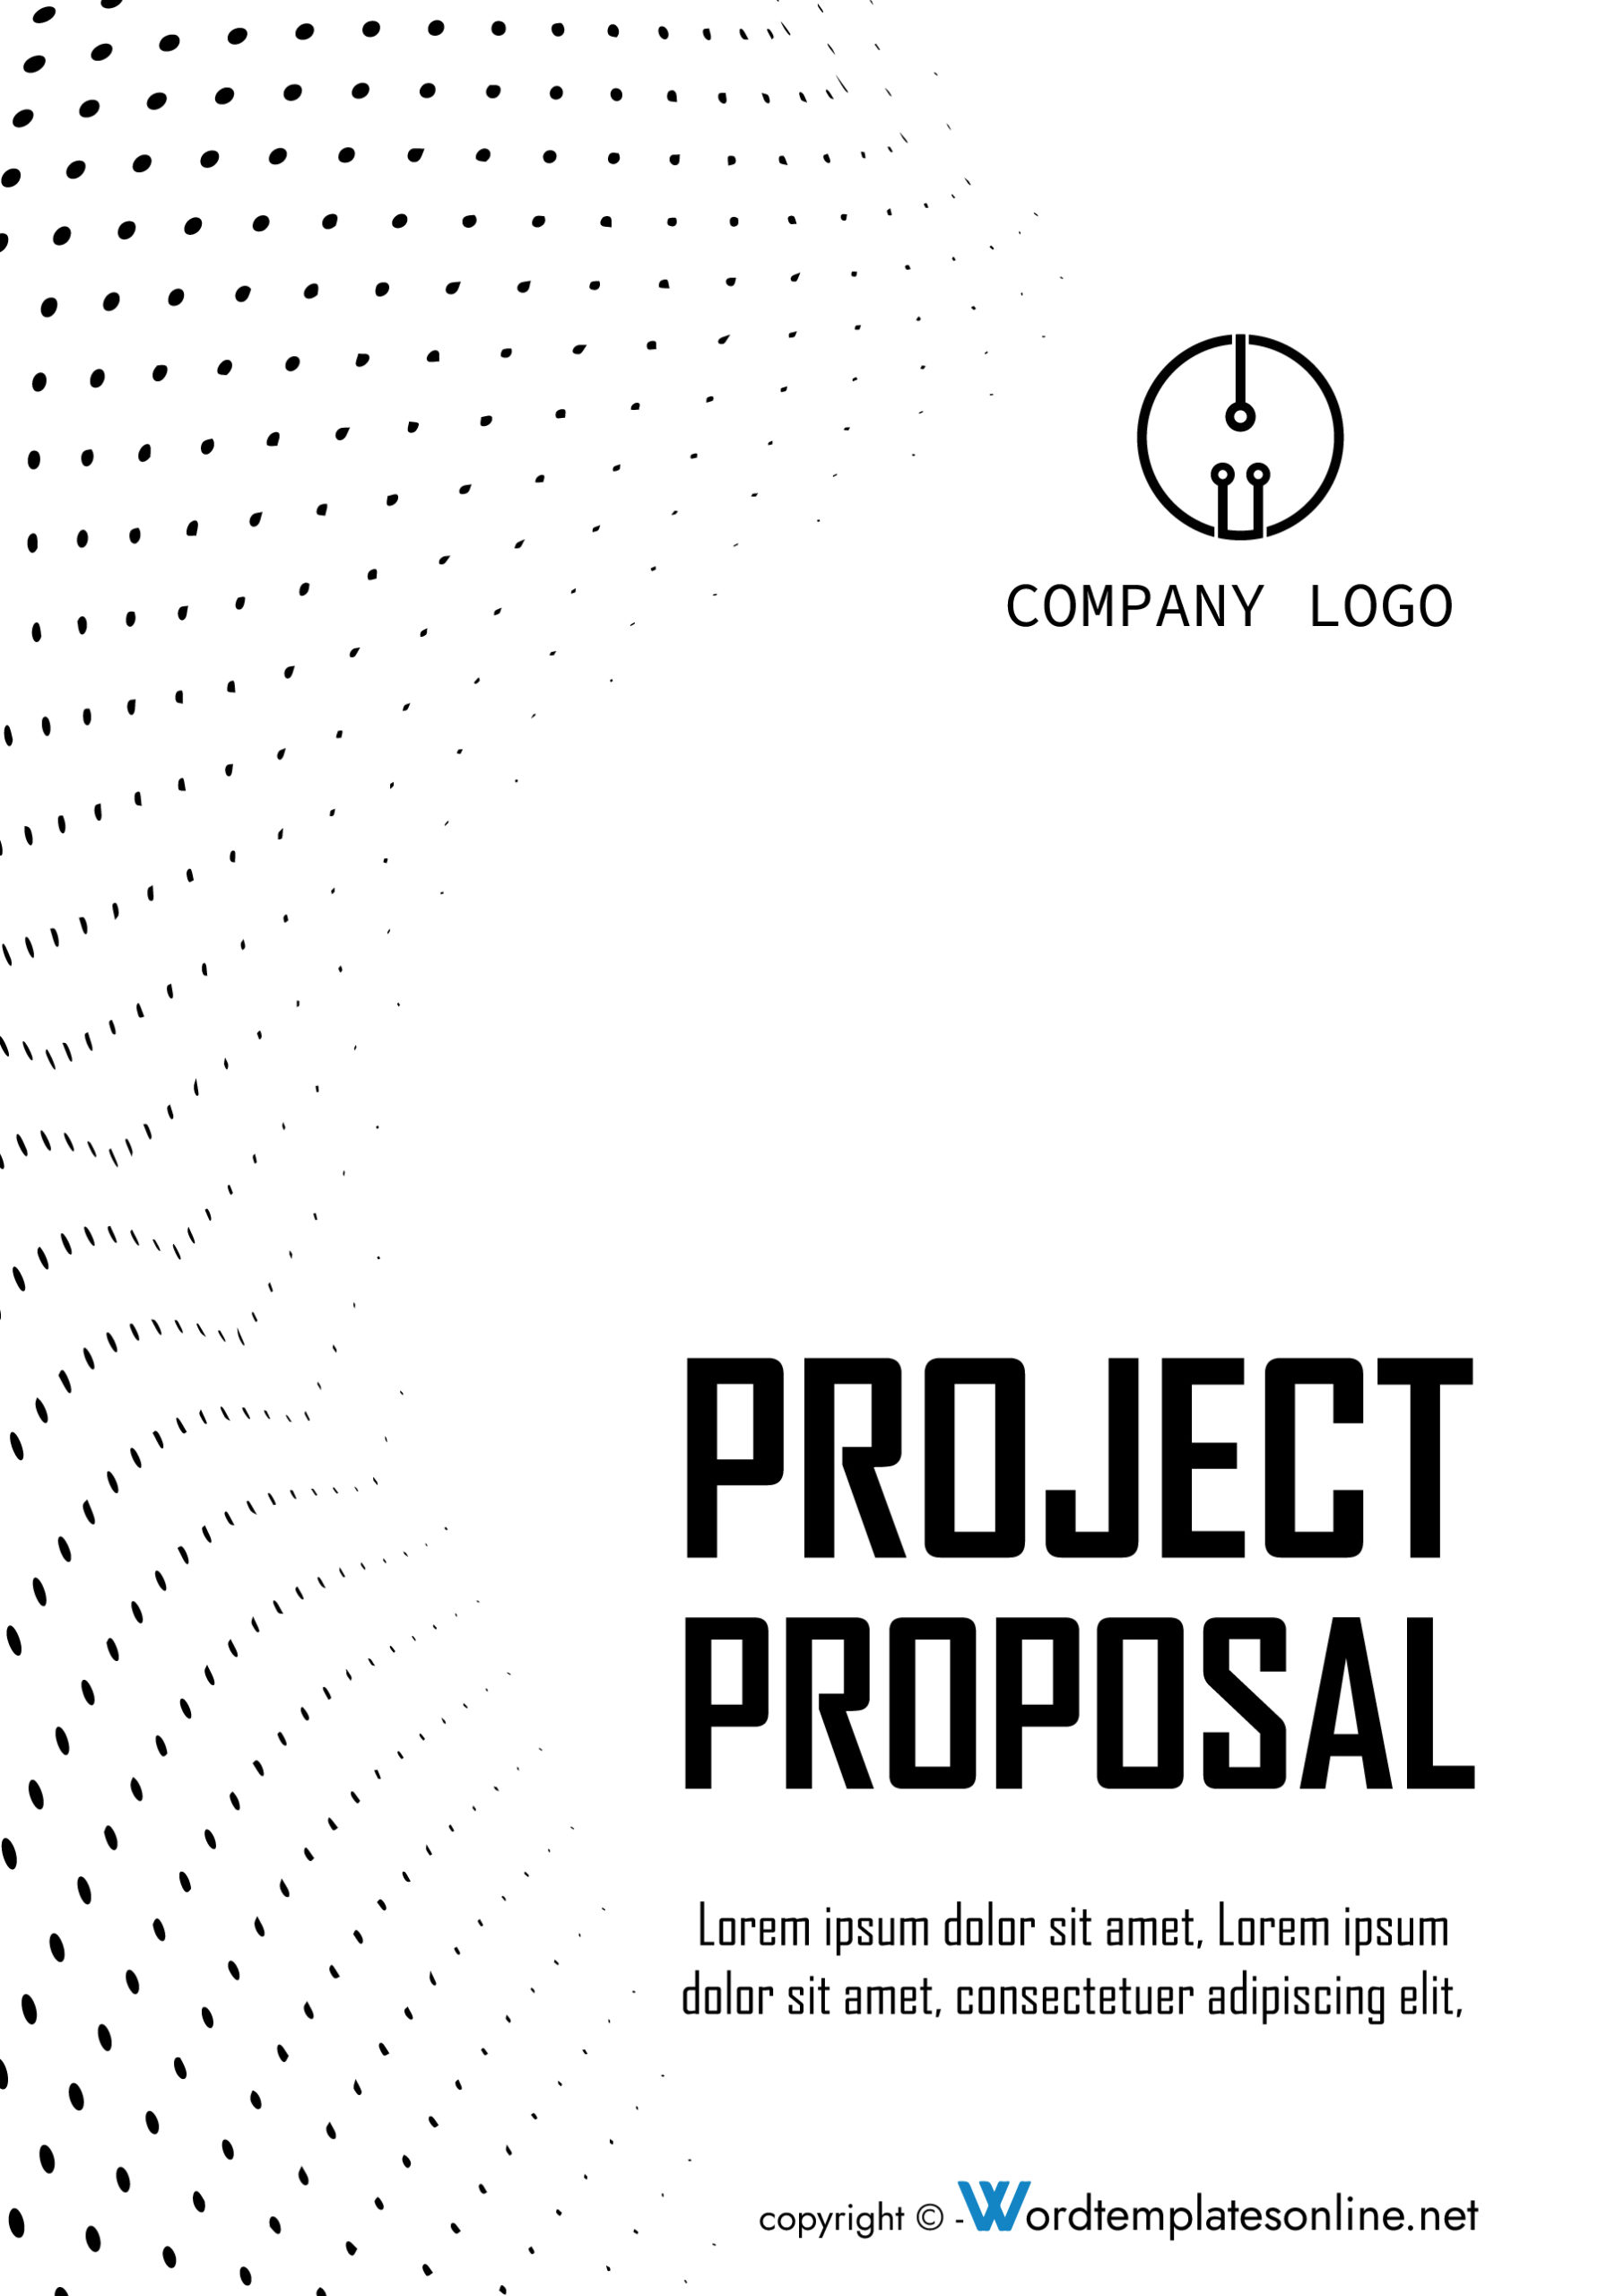 sample project proposal cover